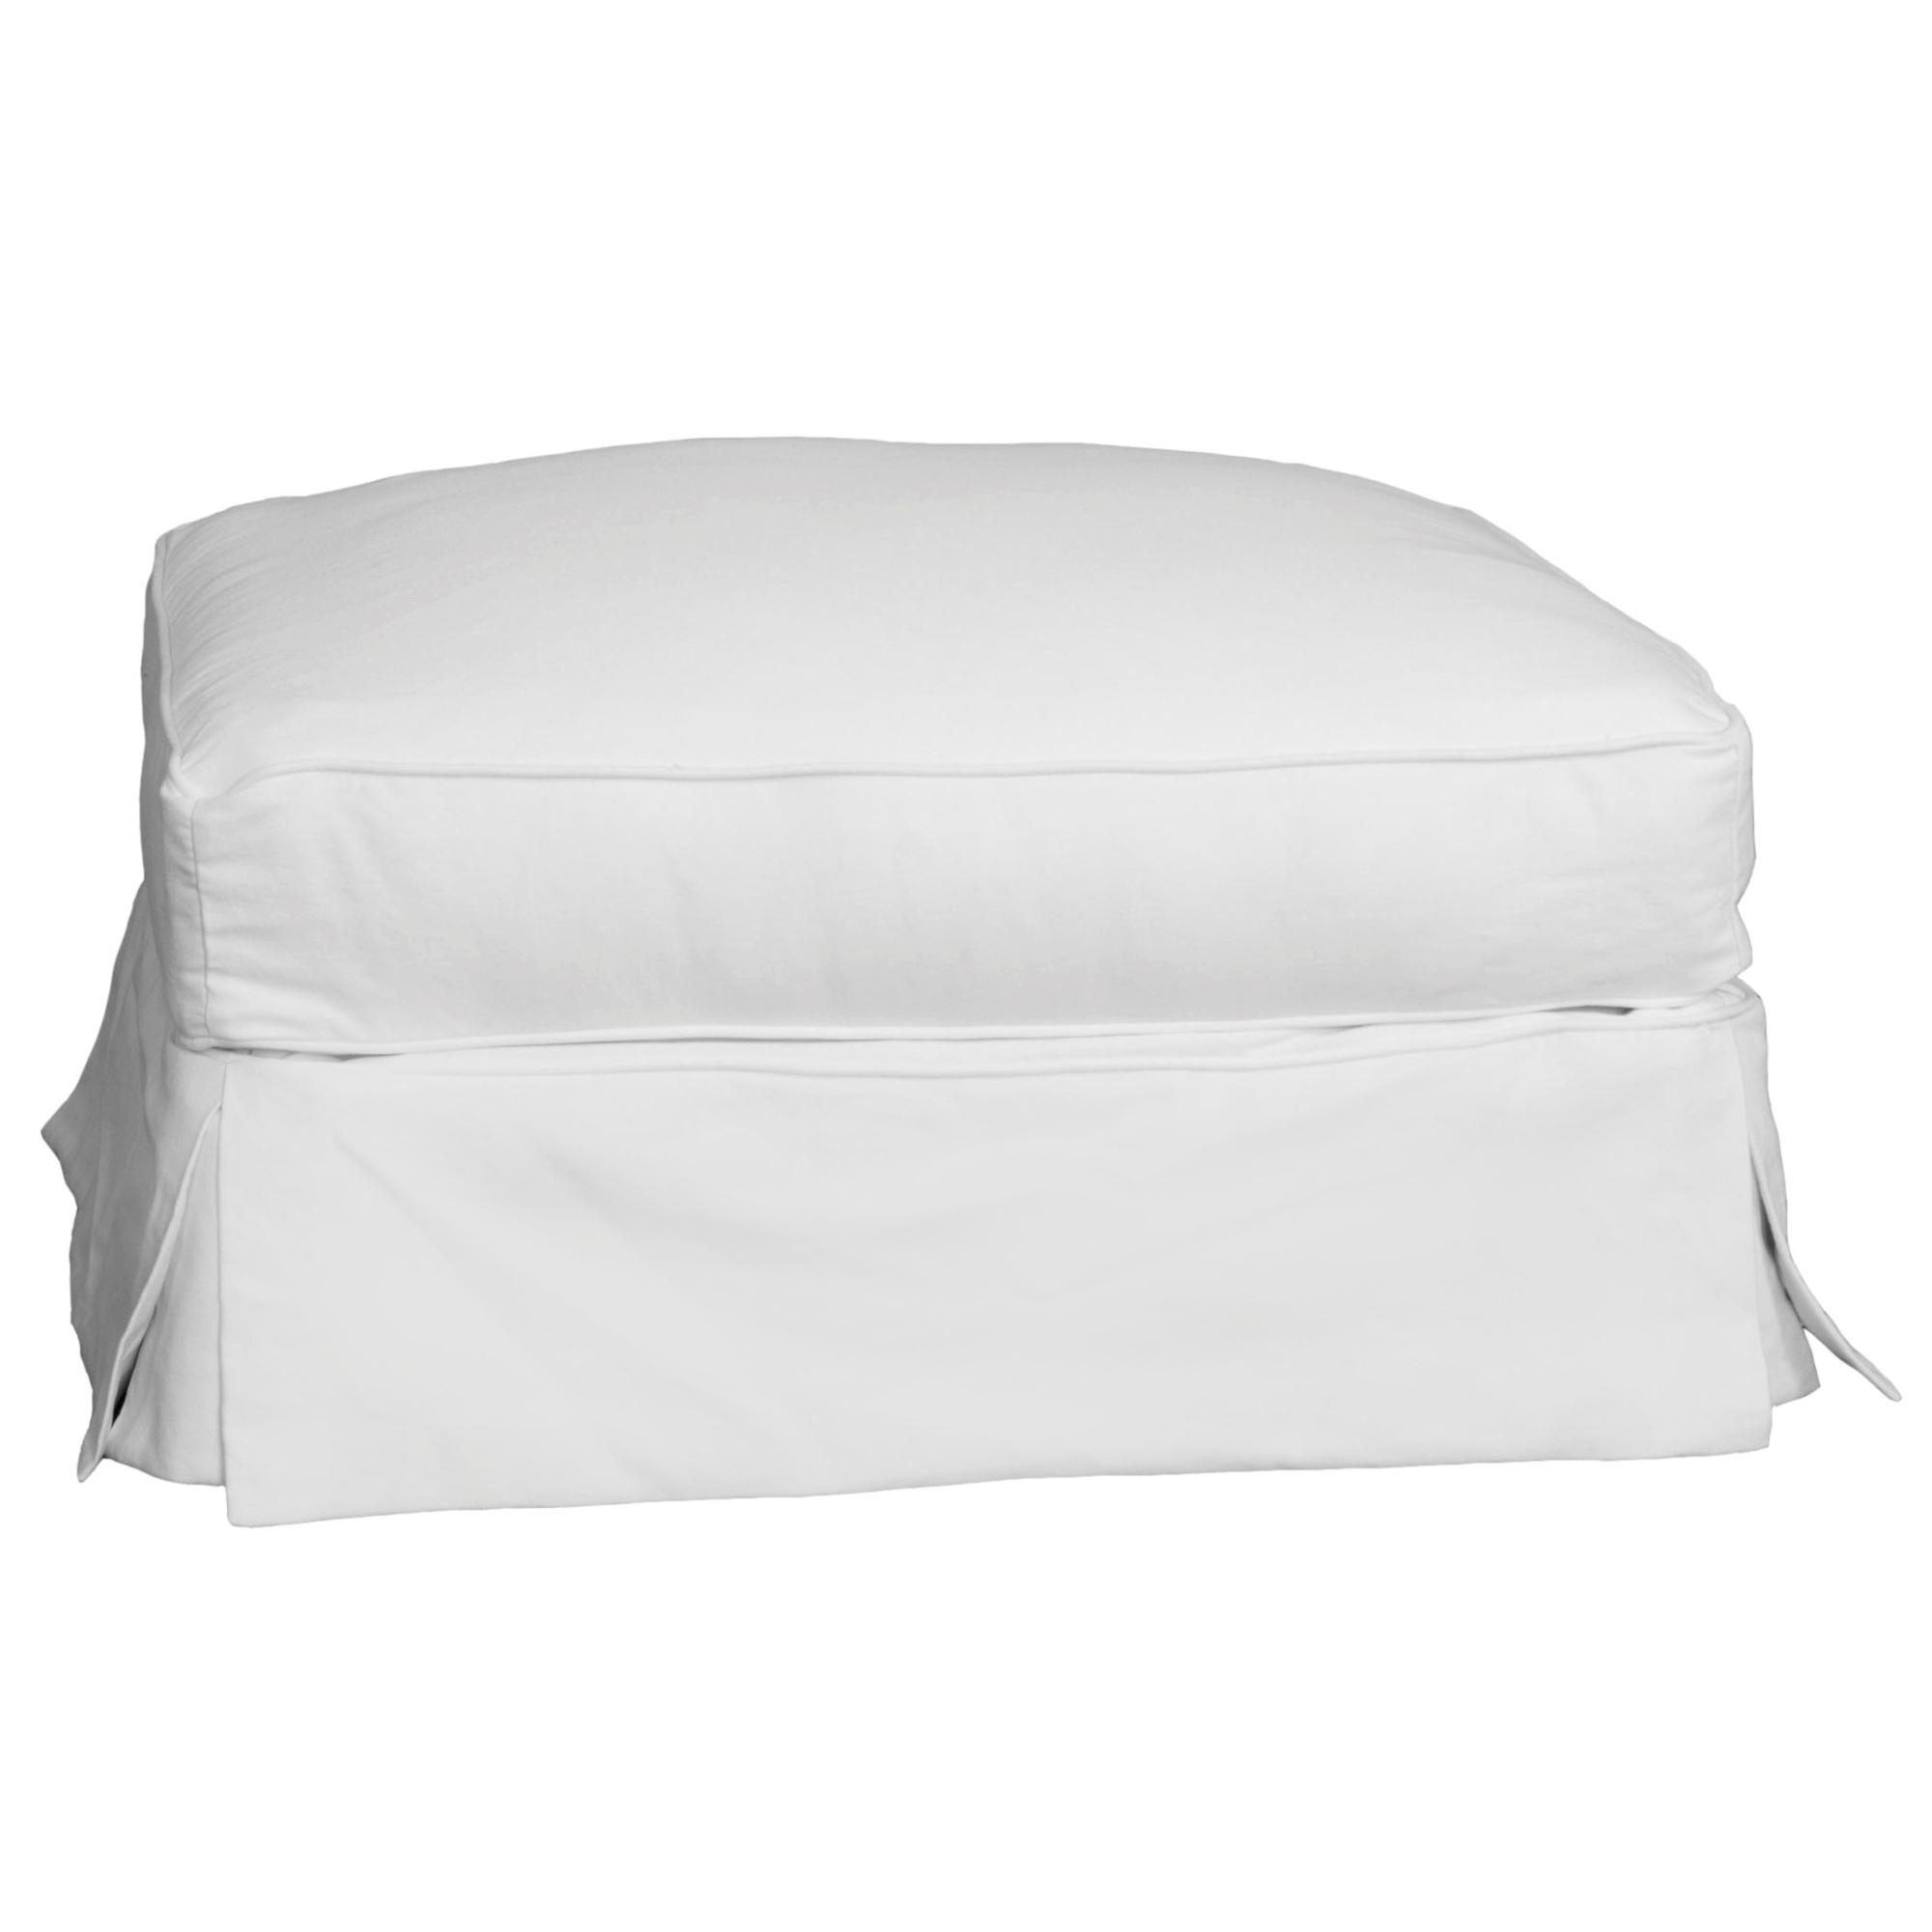 Besthom Americana Upholstered Pillow Top Ottoman - Warm White